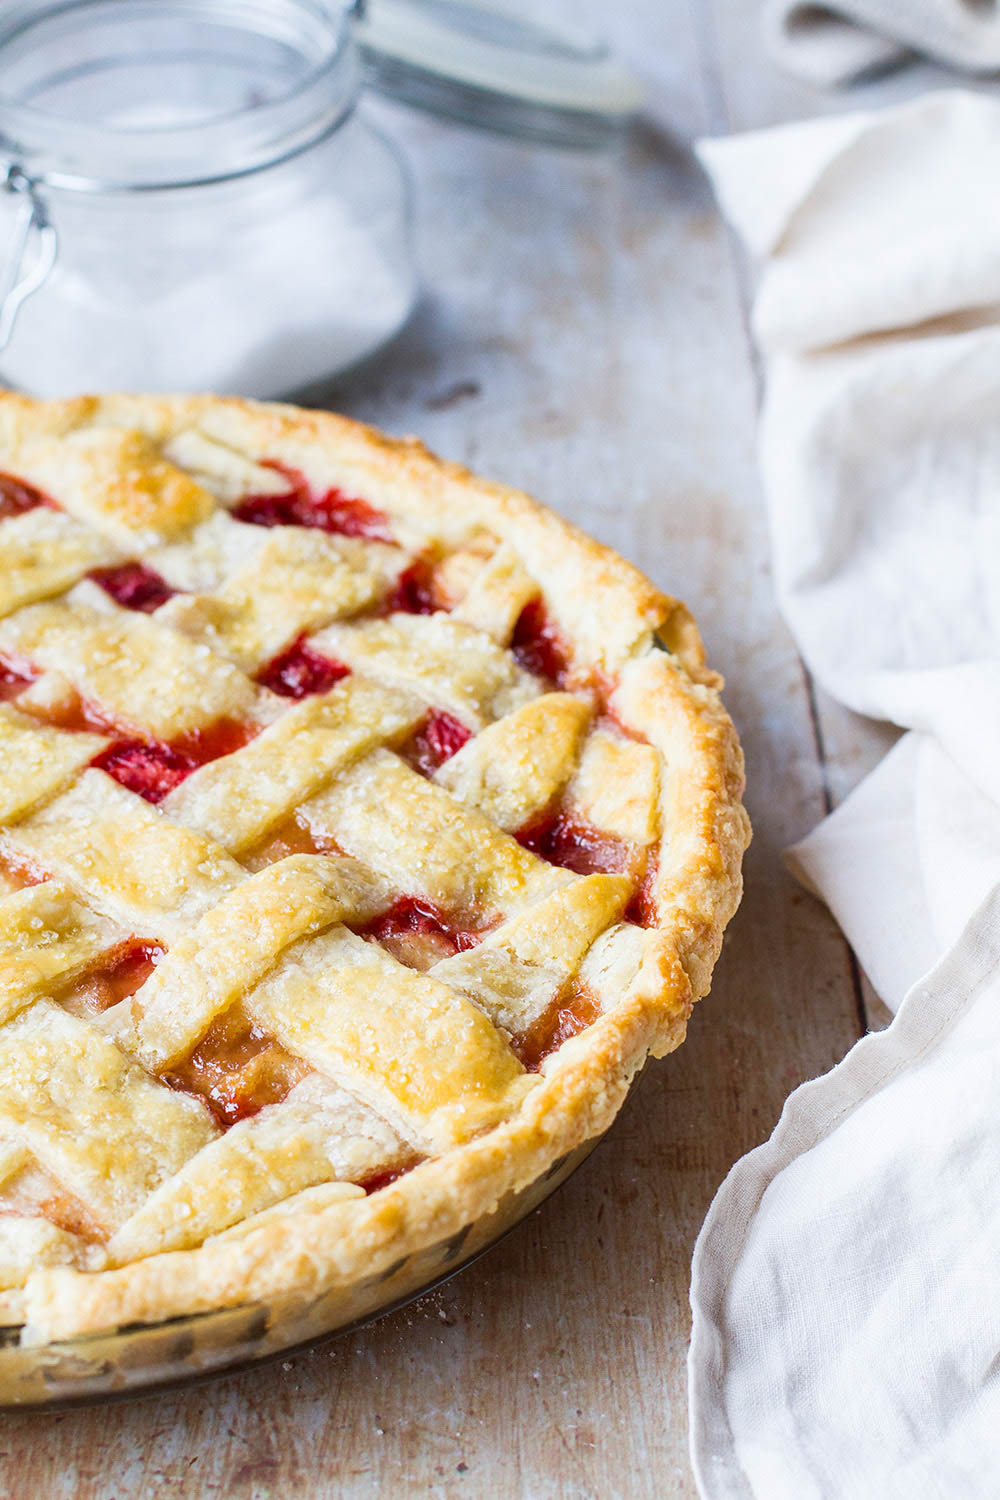 Strawberry peach pie seen from the side.